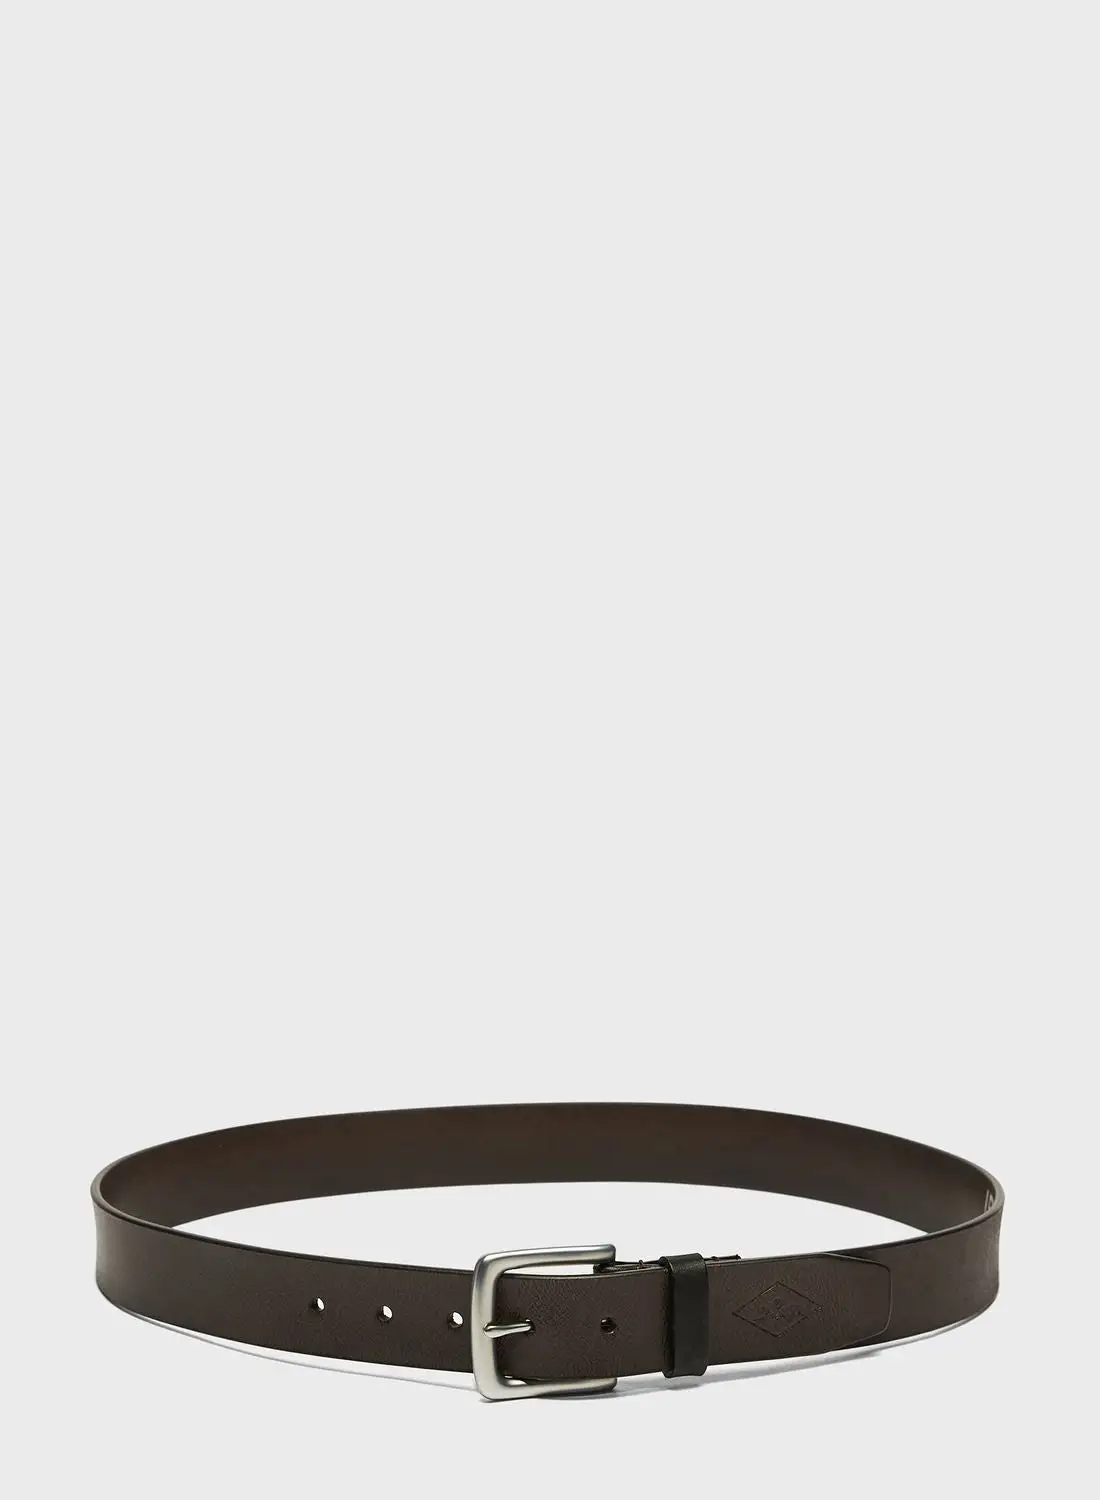 Lee Cooper Allocated Hole Belt